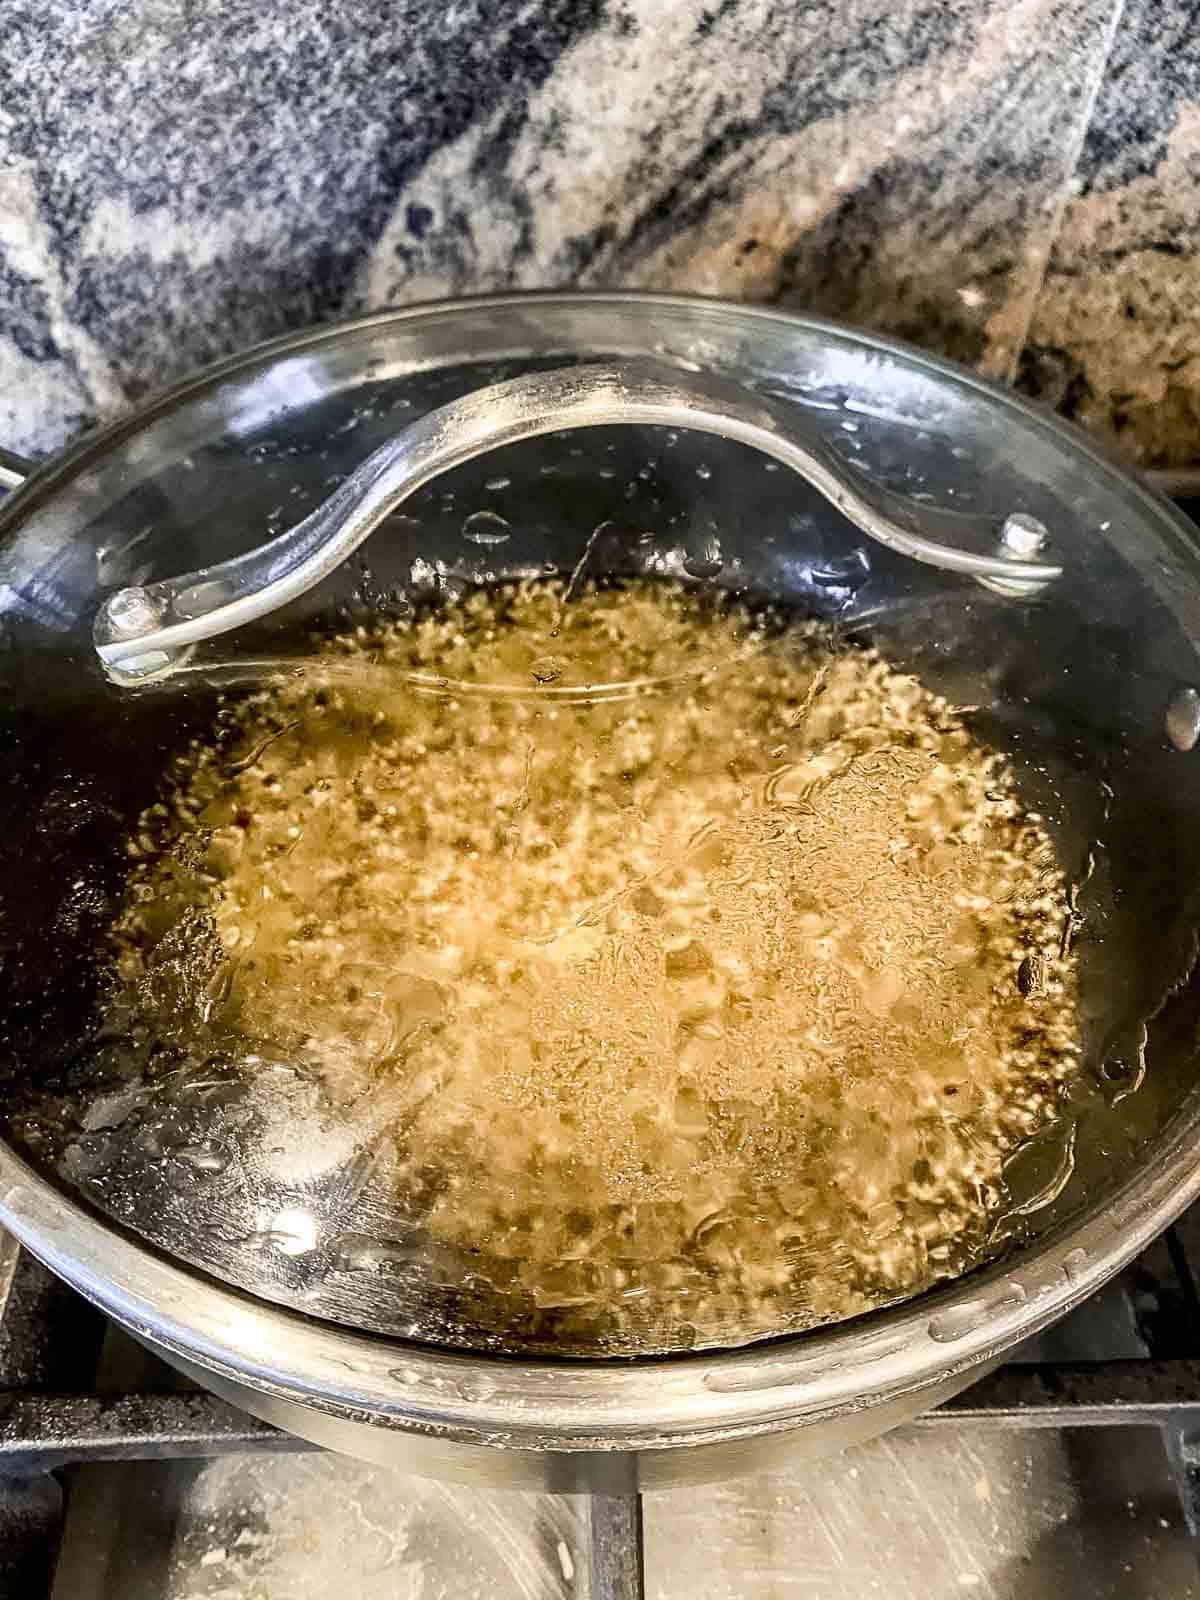 Quinoa cooking in a covered pot